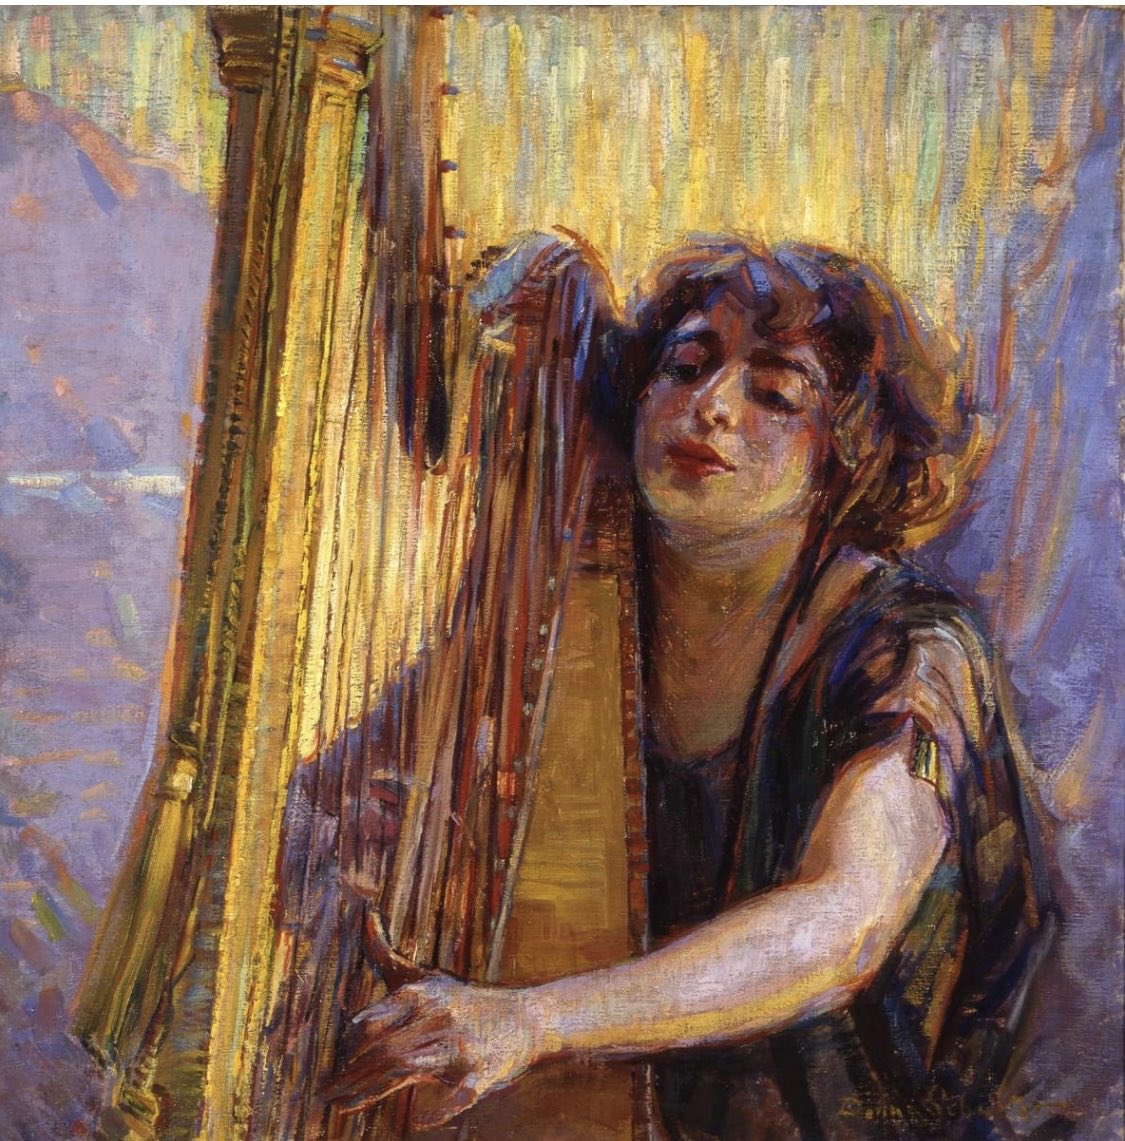 Good morning. American artist Donna Schuster (1883-1953) captures the rapture of music in “O’er Waiting Harp Strings” oil on canvas 1921 displayed at the Laguna Art Museum. #music #art #harp